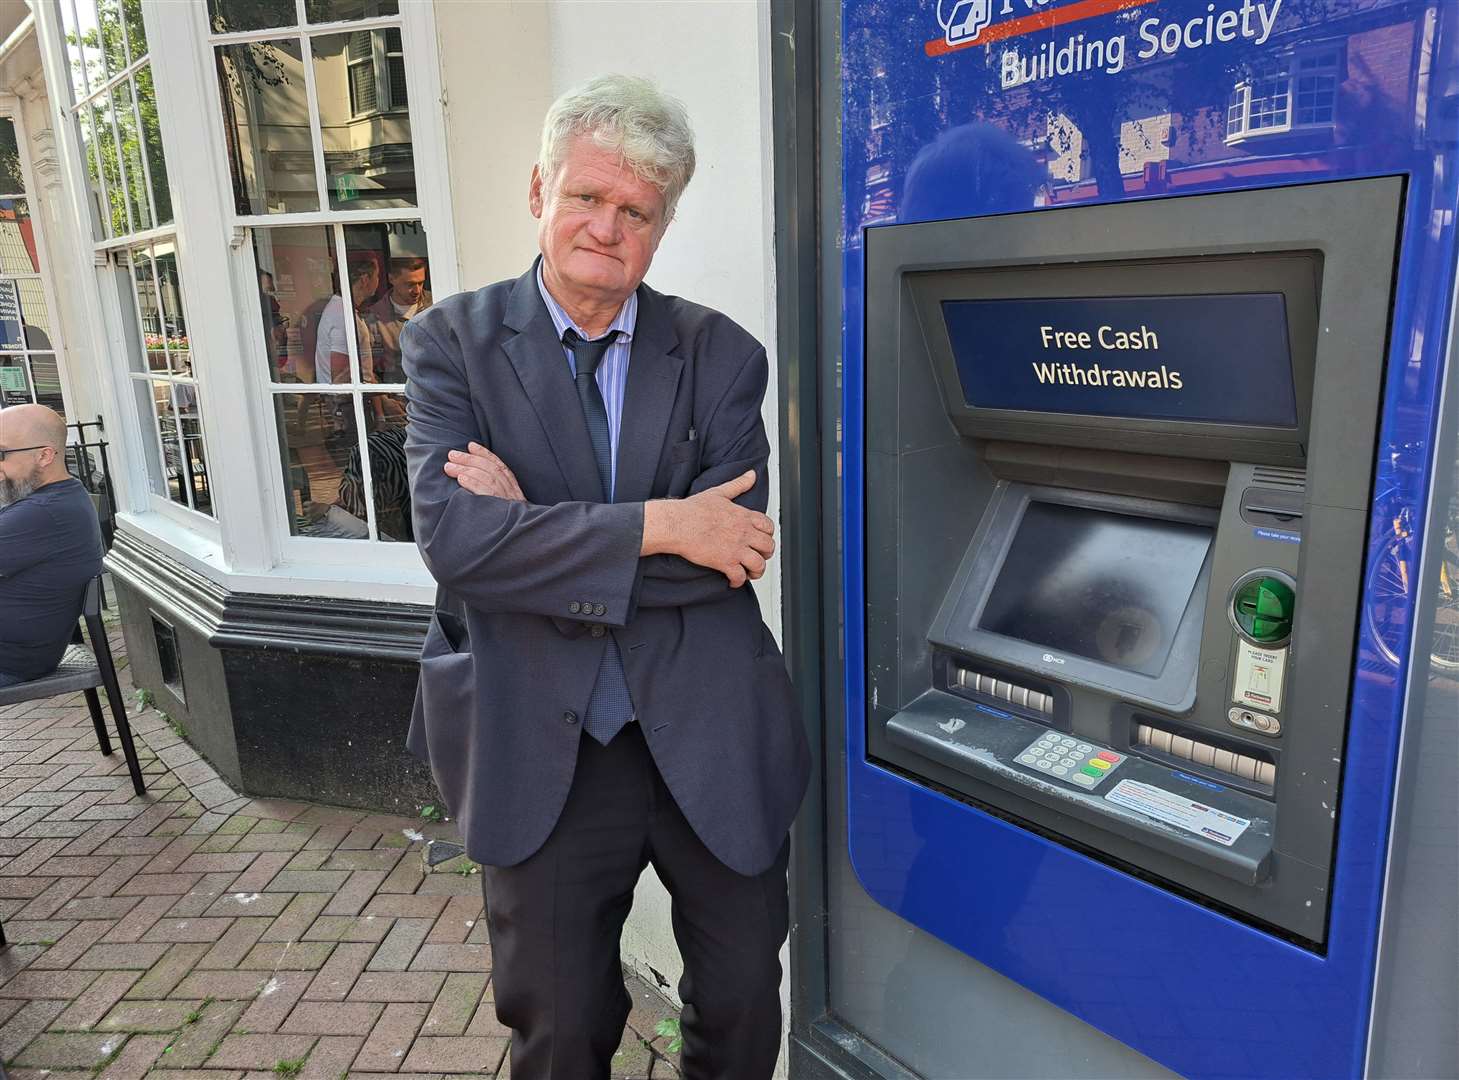 Not for me, thank you. Our man has never tried to use an outdoor cash machine